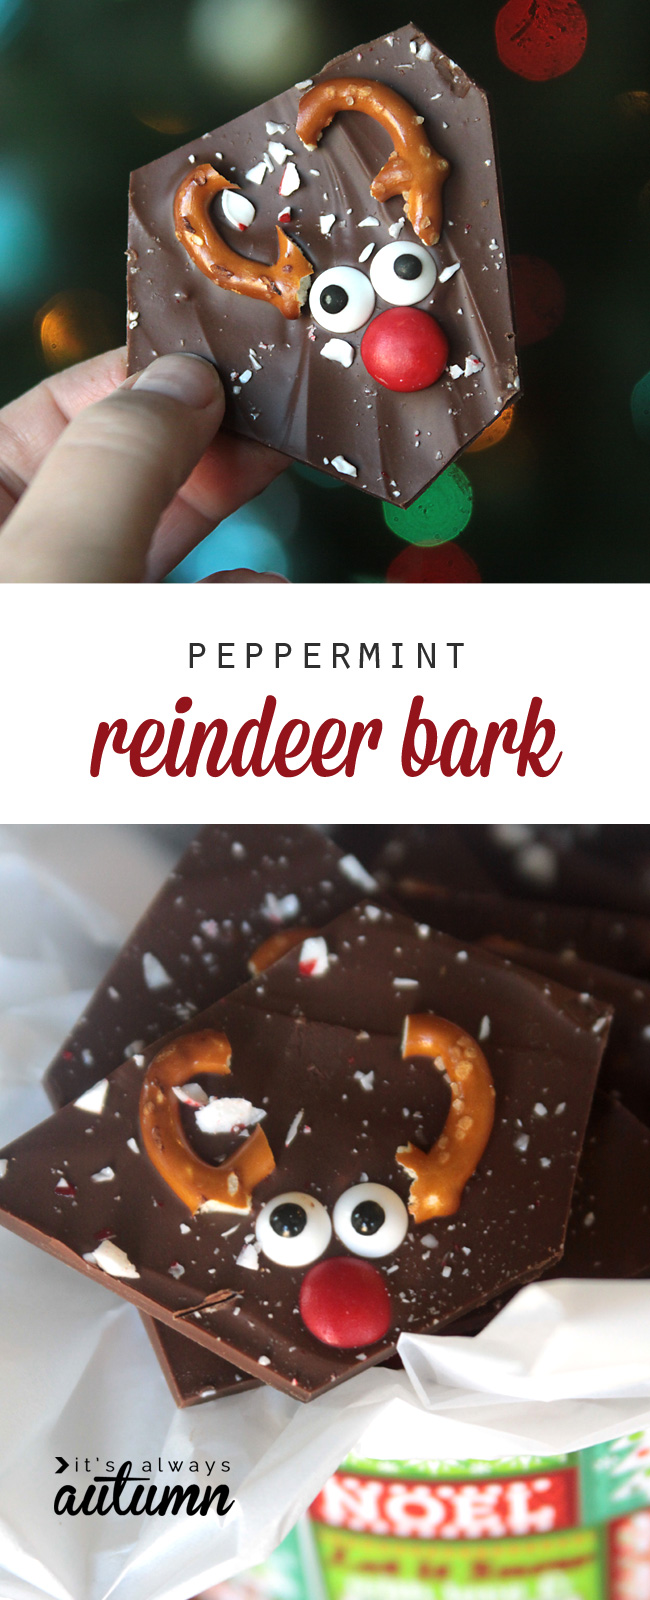 Peppermint bark candy decorated to look like a reindeer